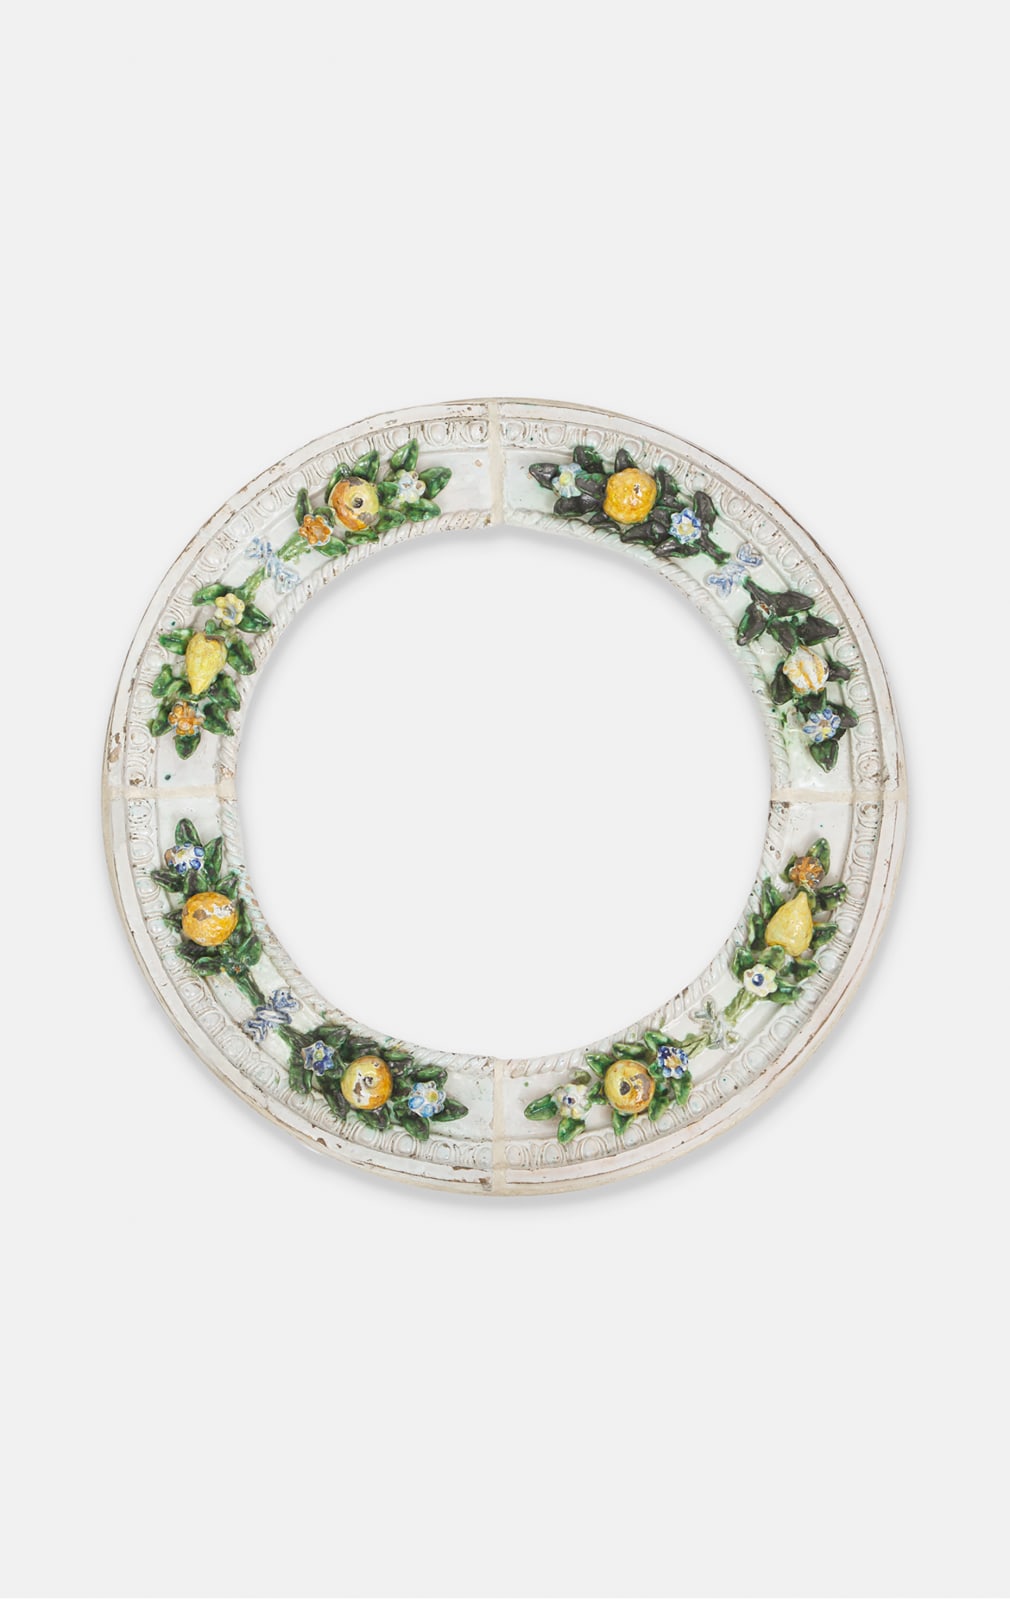 Girolamo della Robbia (1488-1566) (Workshop of), Roundel decorated with a garland of fruits and flowers, 16th century